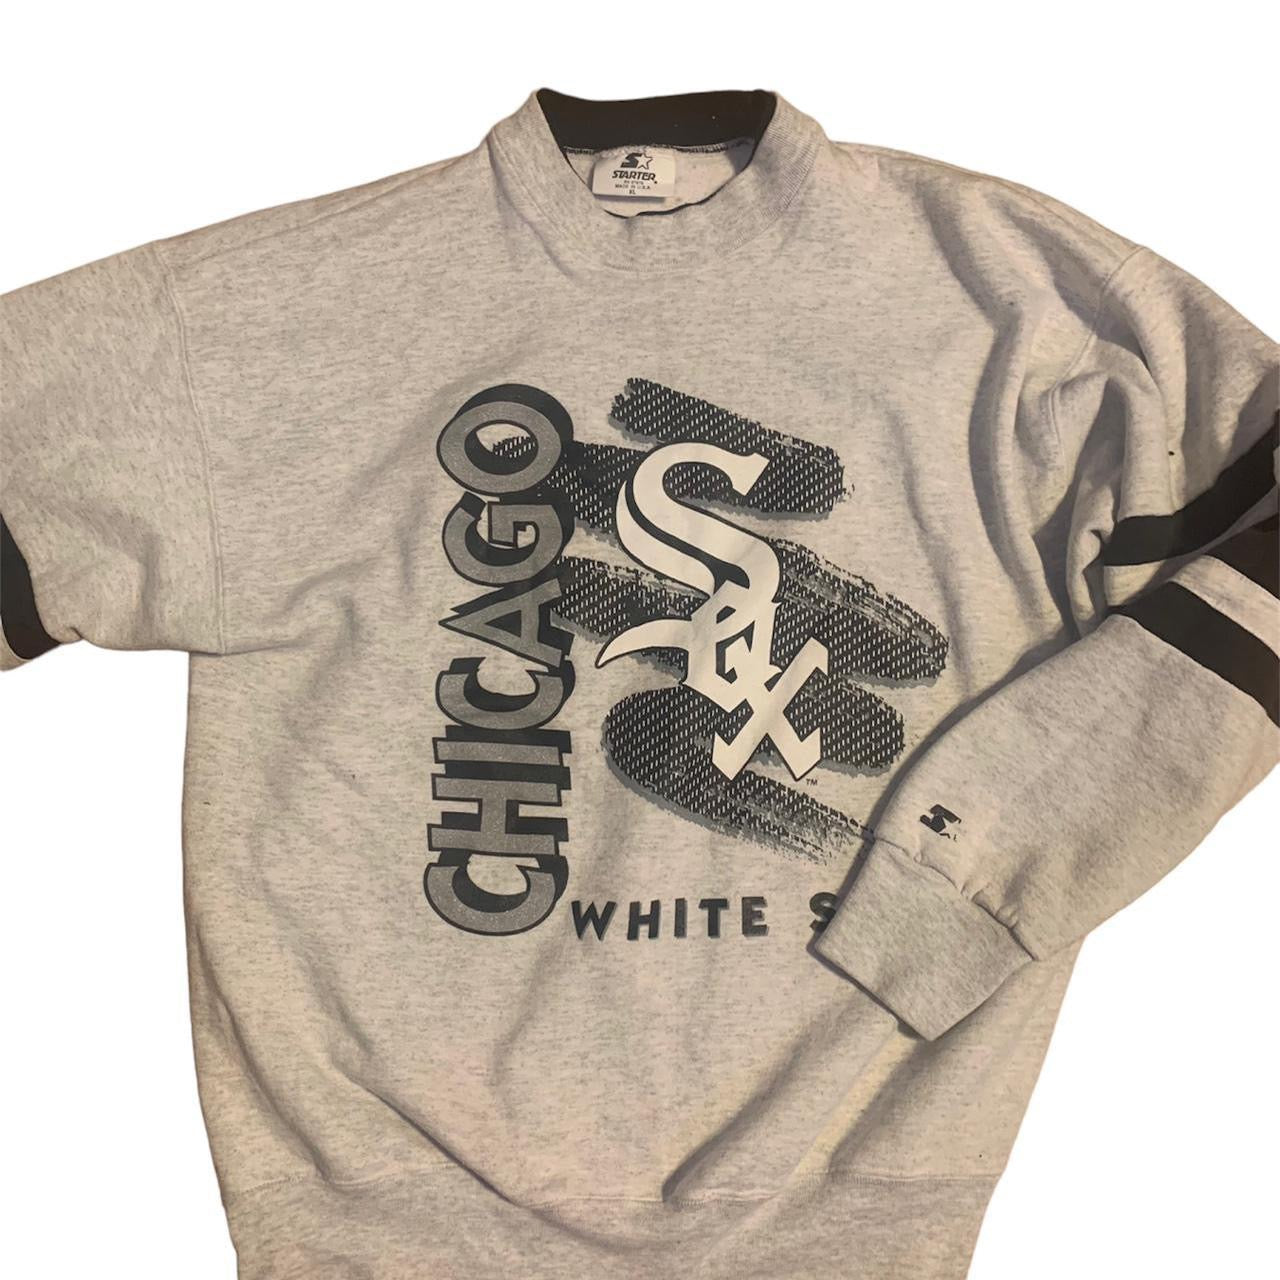 1993 CHICAGO WHITE SOX Made in USA Size XL Vintage MLB T-Shirt